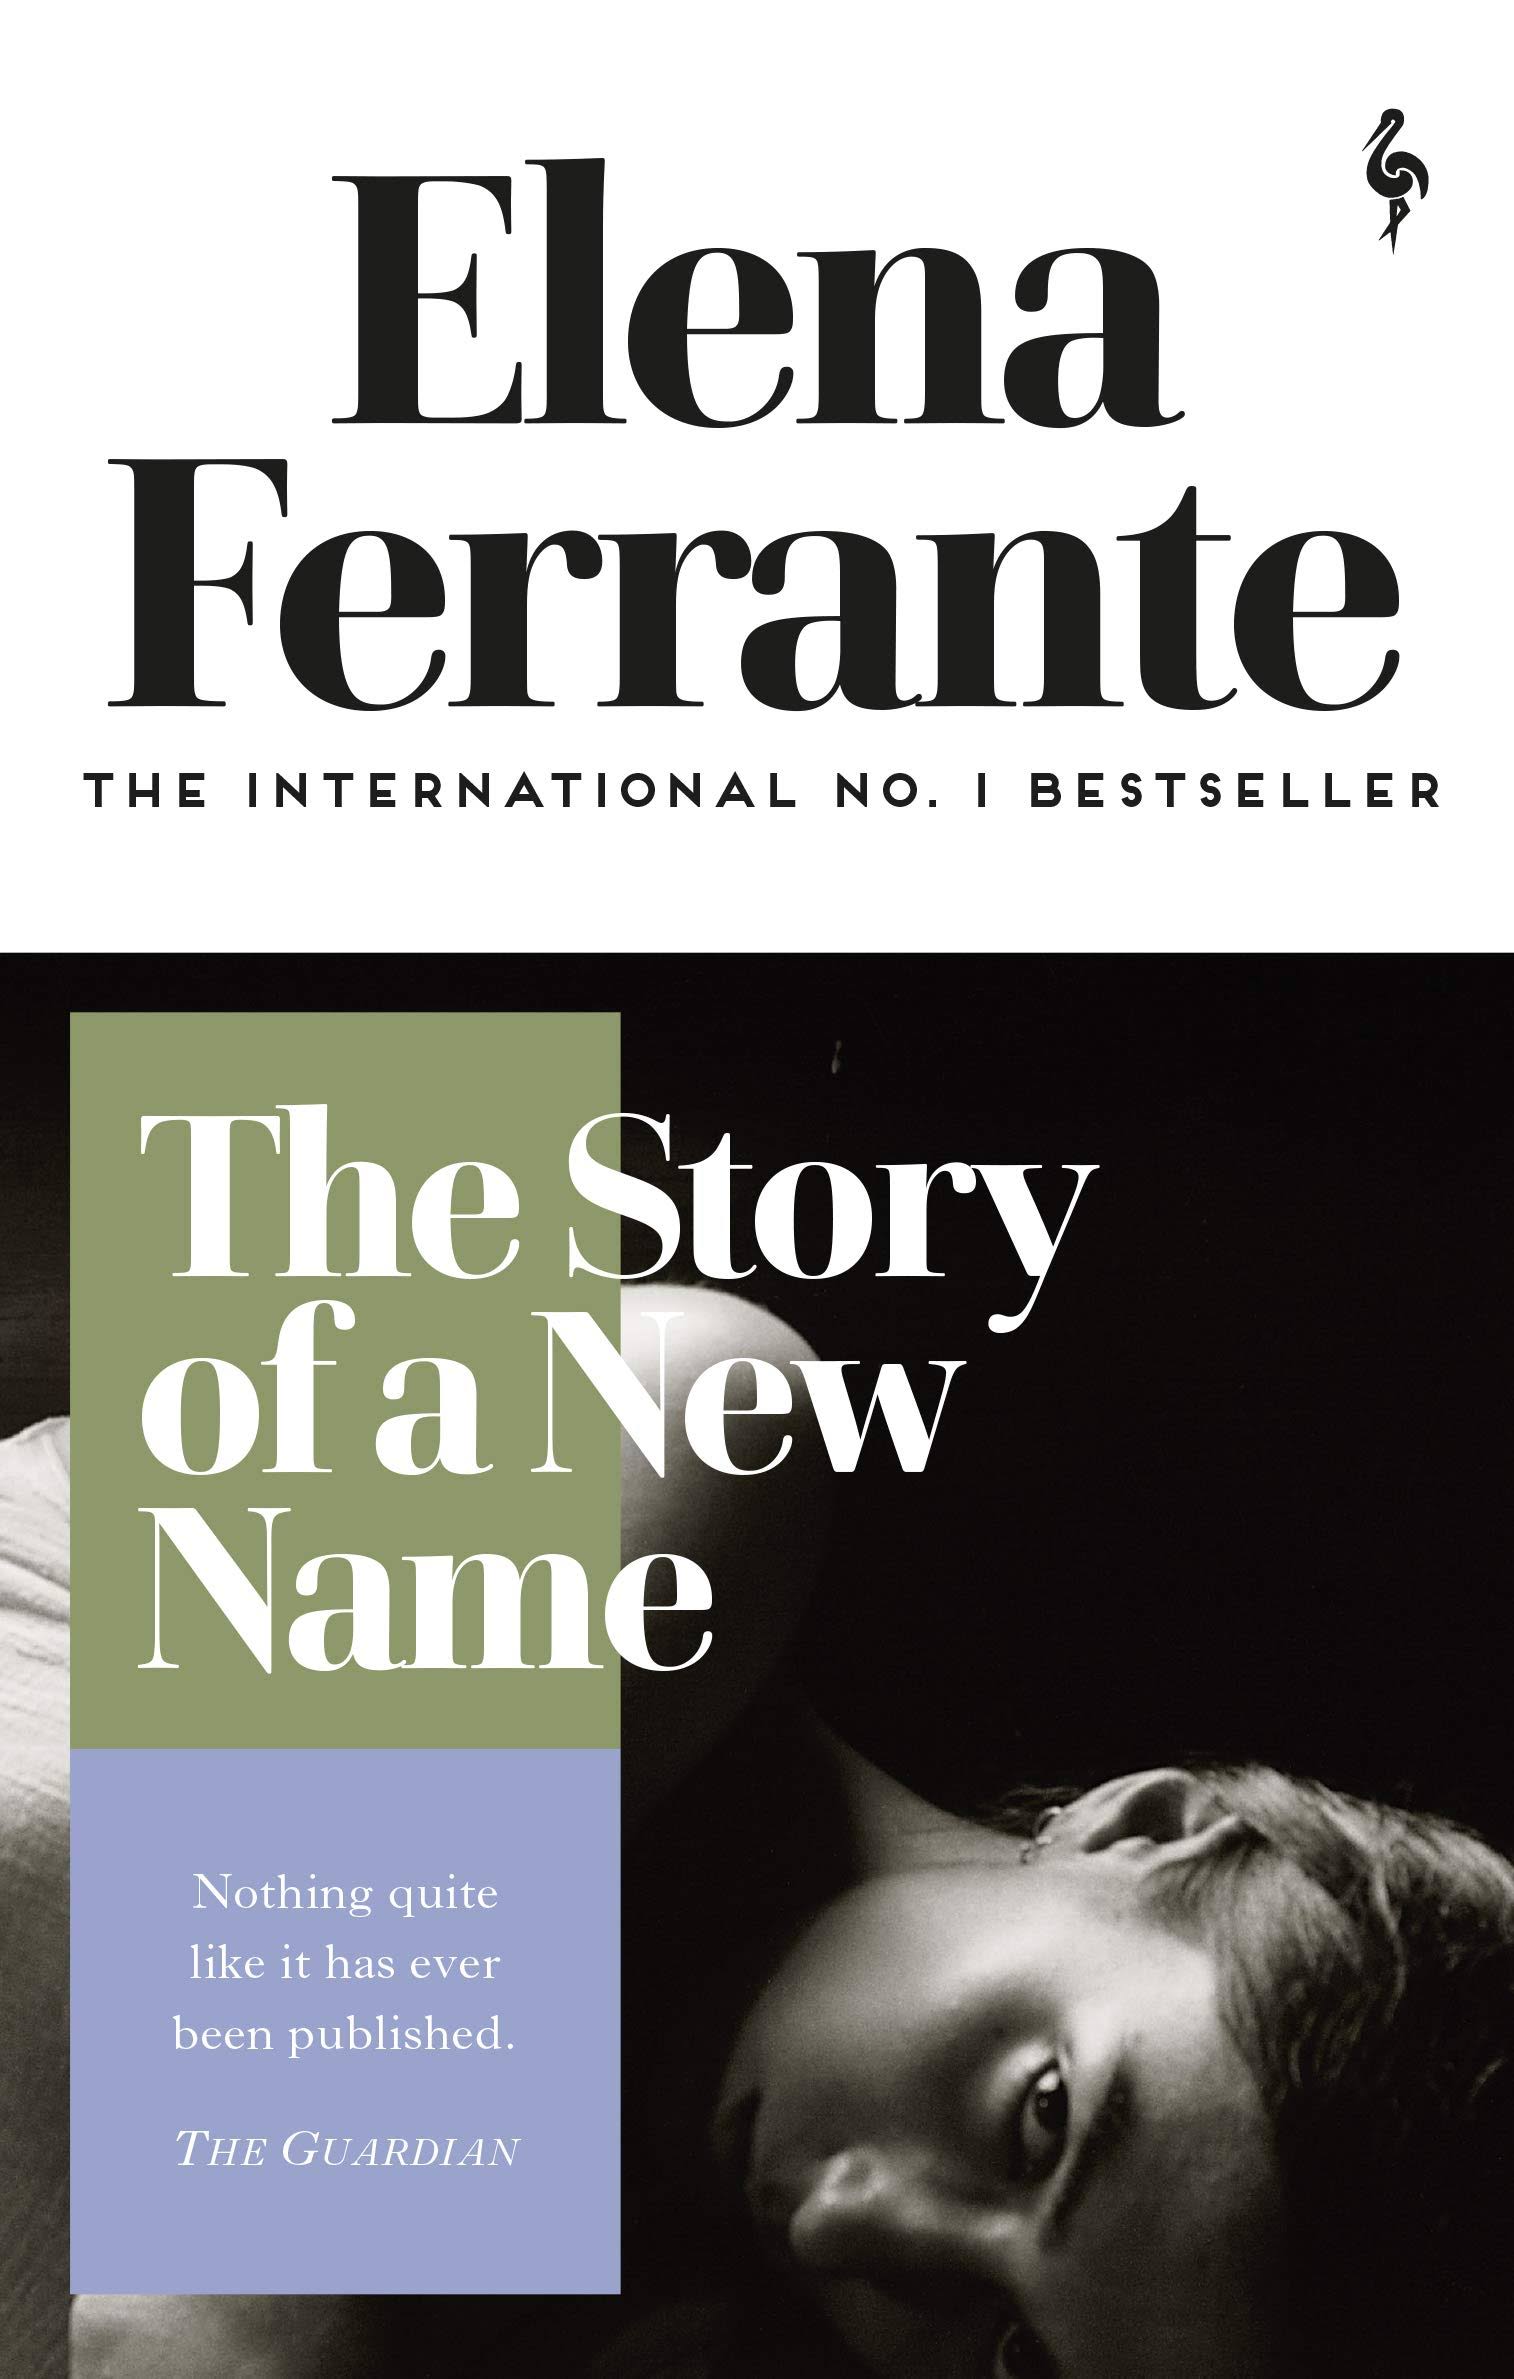 The Story of a New Name by Elena Ferrante